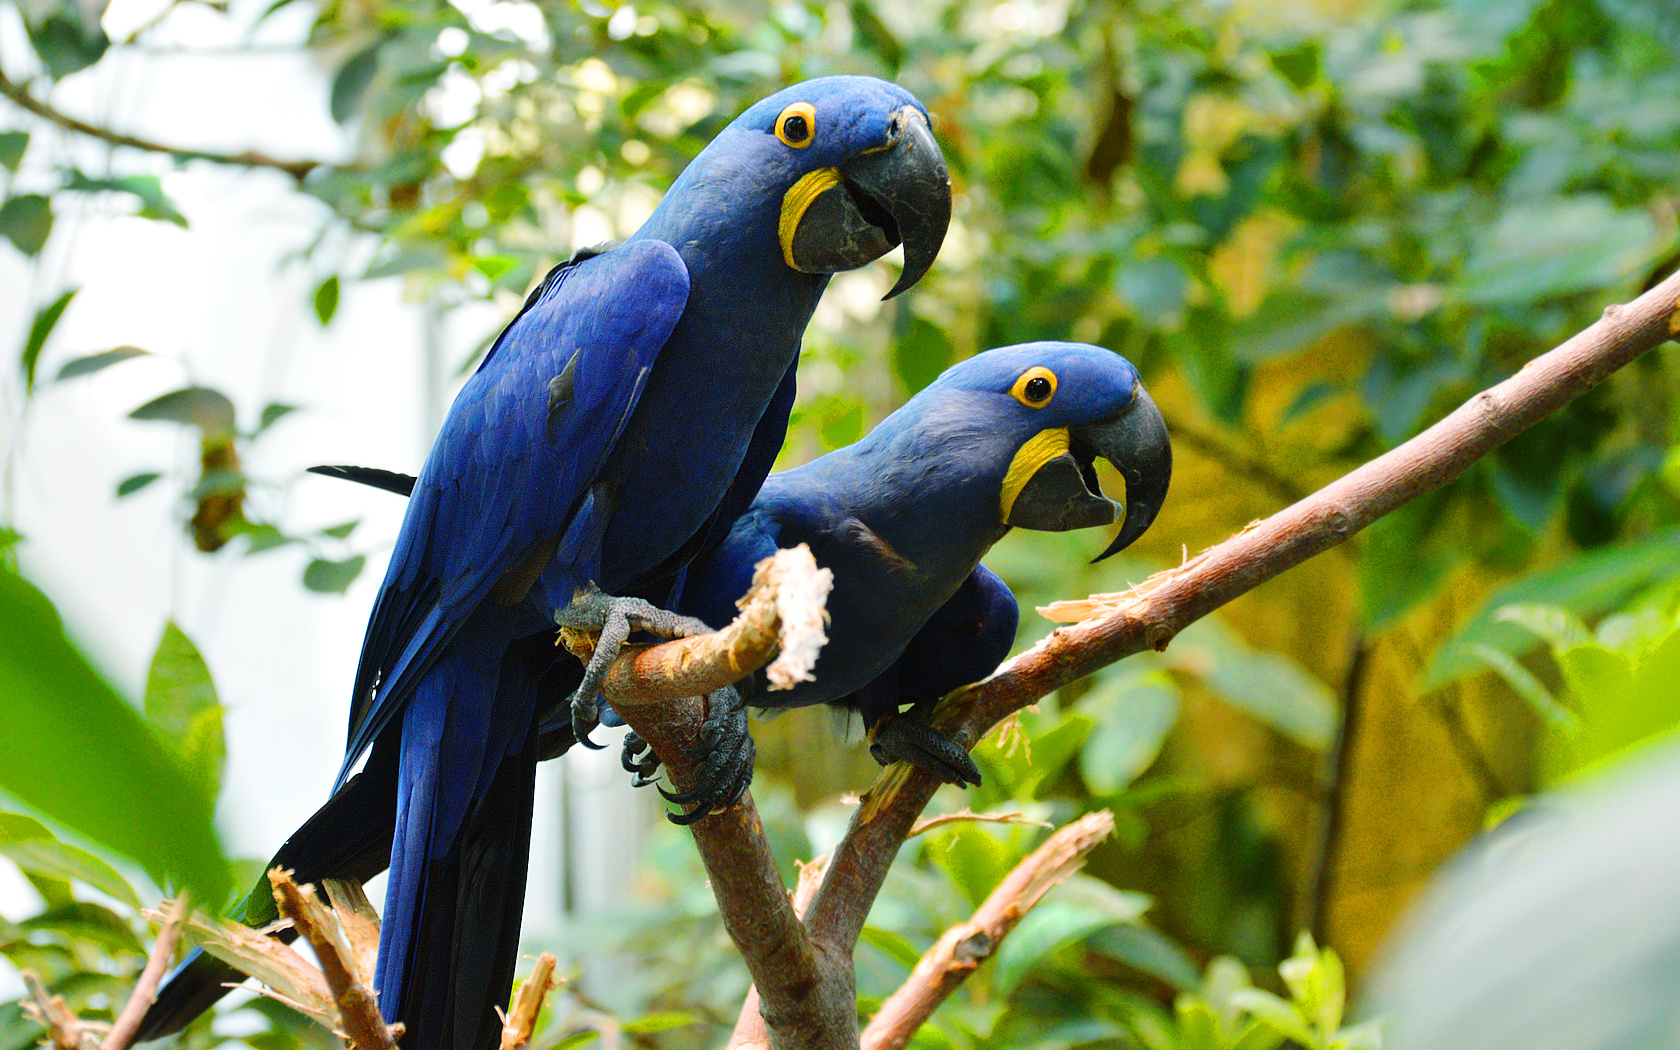 Suzanne Britton Nature Photography: Hyacinth Macaws